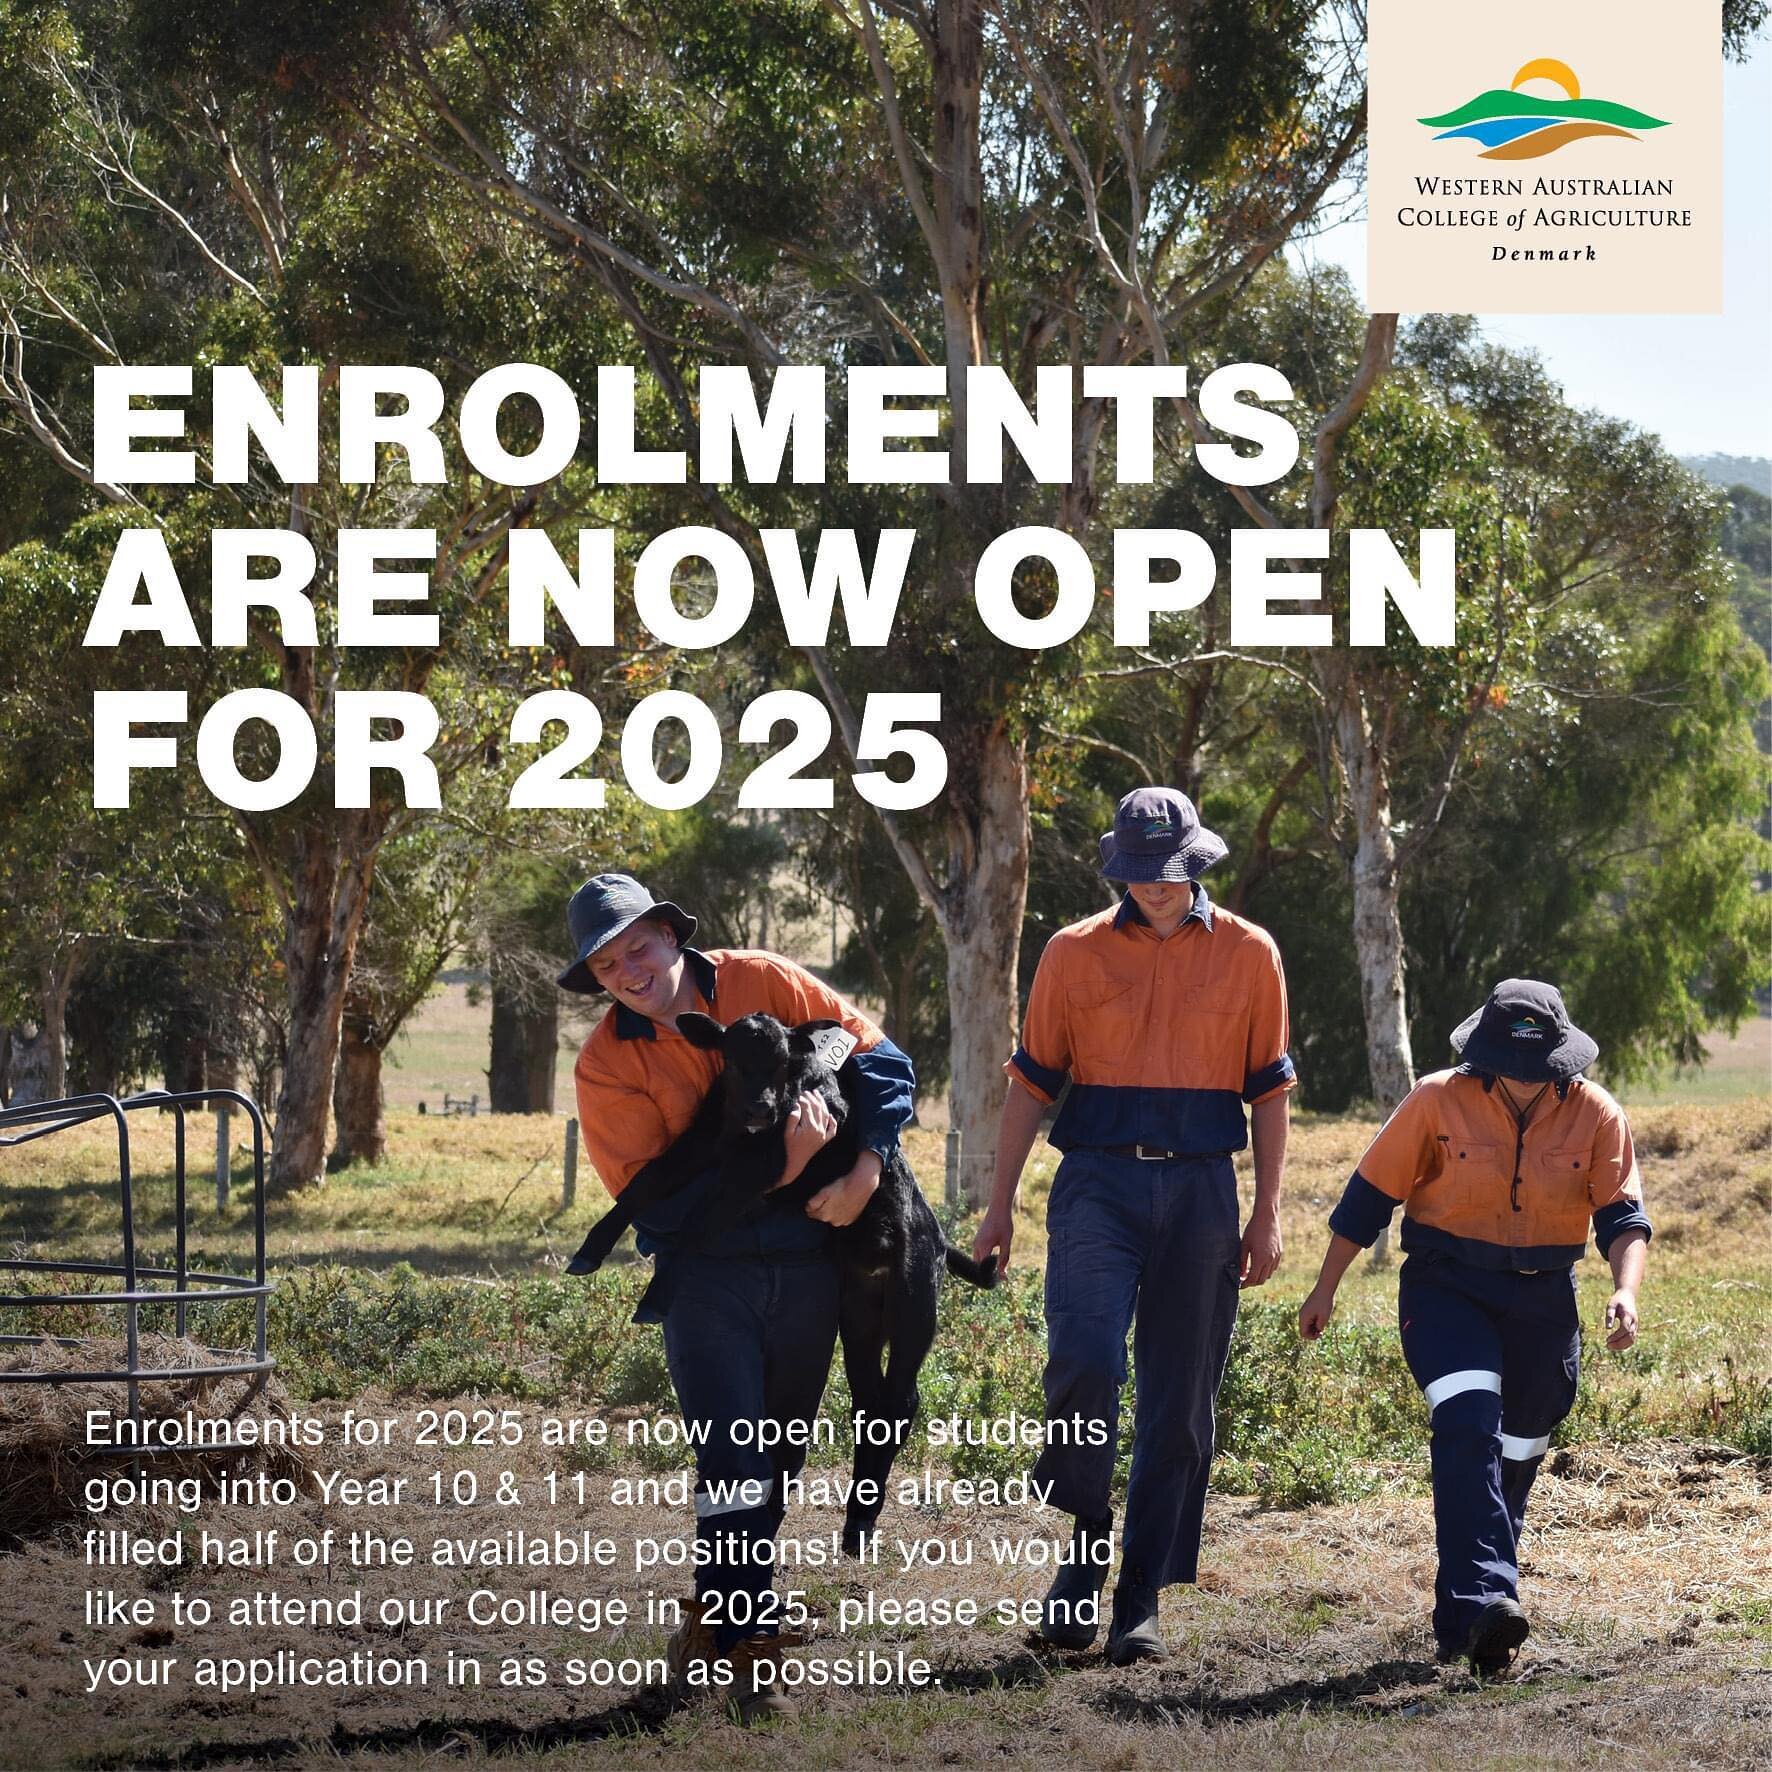 Enrolments for students wishing to commence in either Year 10 or Year 11 in 2025 are open. We are experiencing a significant increase in the volume of applications this year. Round 1 applications have already been processed and we have sent out forma